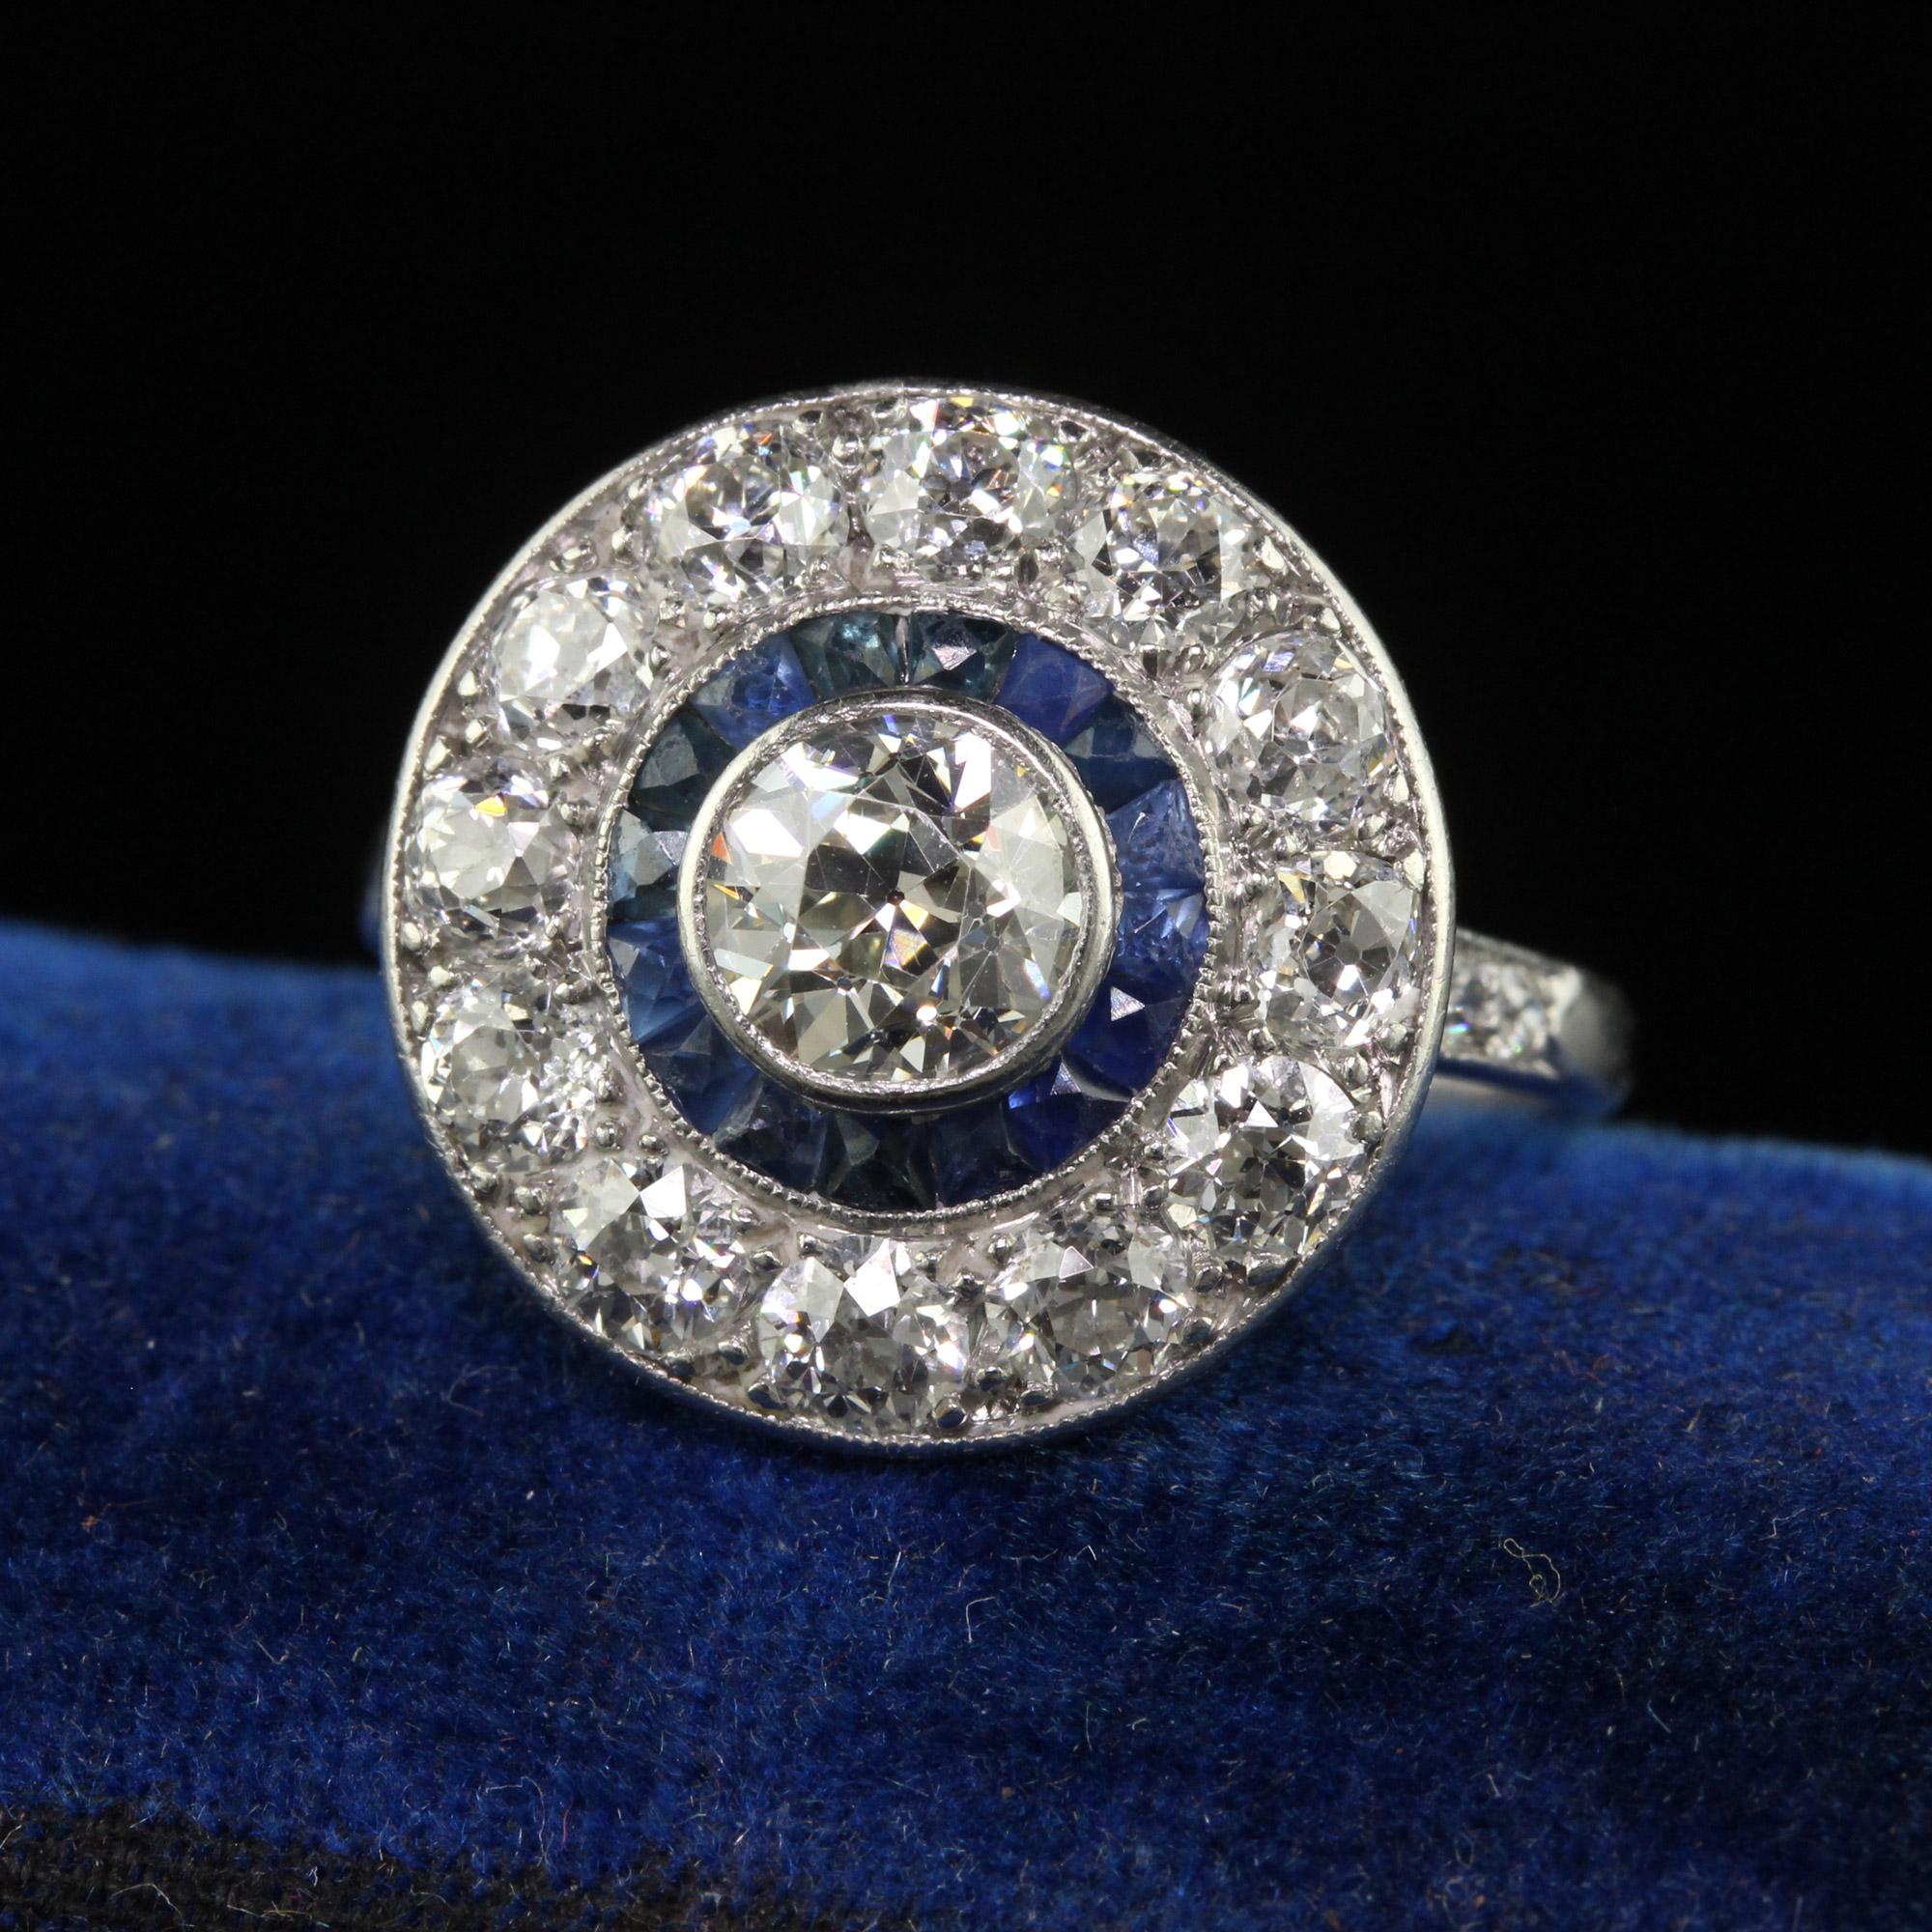 Beautiful Antique Art Deco Platinum Old European Diamond and Sapphire Target Engagement Ring. This incredible engagement ring is crafted in platinum. The center holds a gorgeous white and clean old European cut diamond and is surrounded by a row of